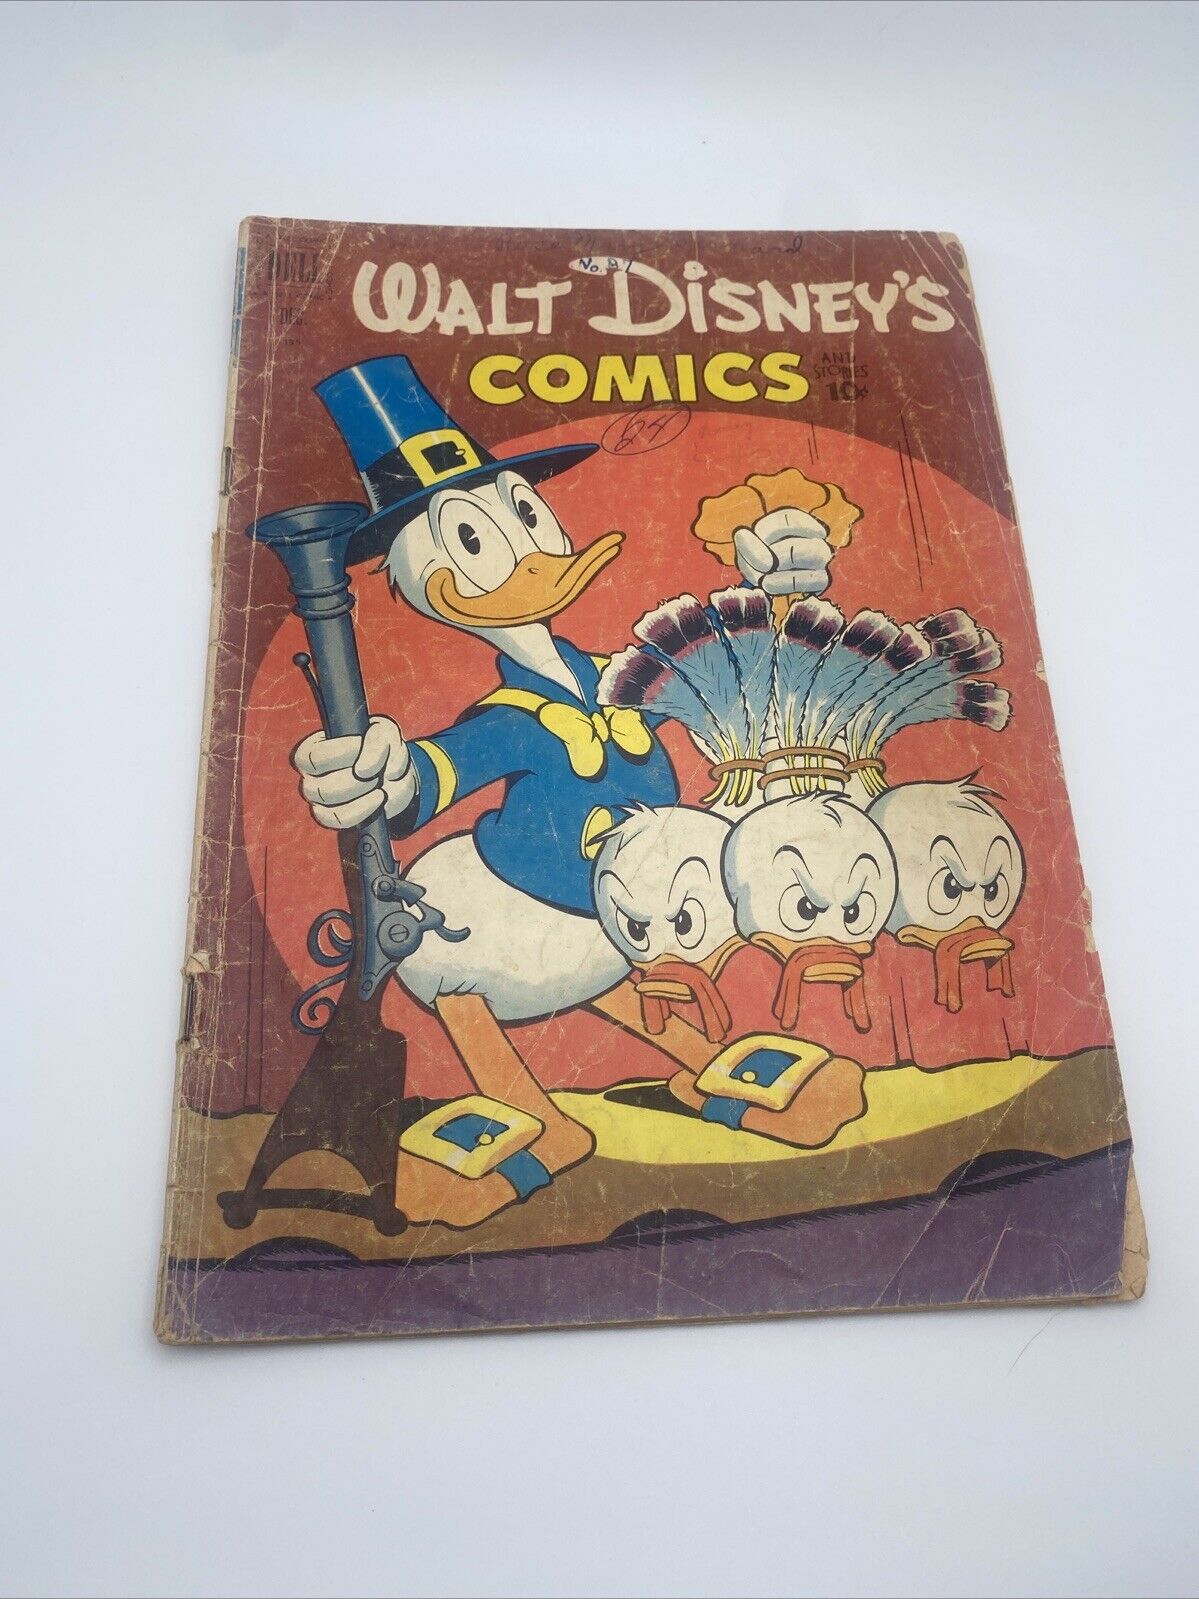 Walt Disney’s Comics and Stories #135 (Dell, 1951) Golden Age Carl Barks